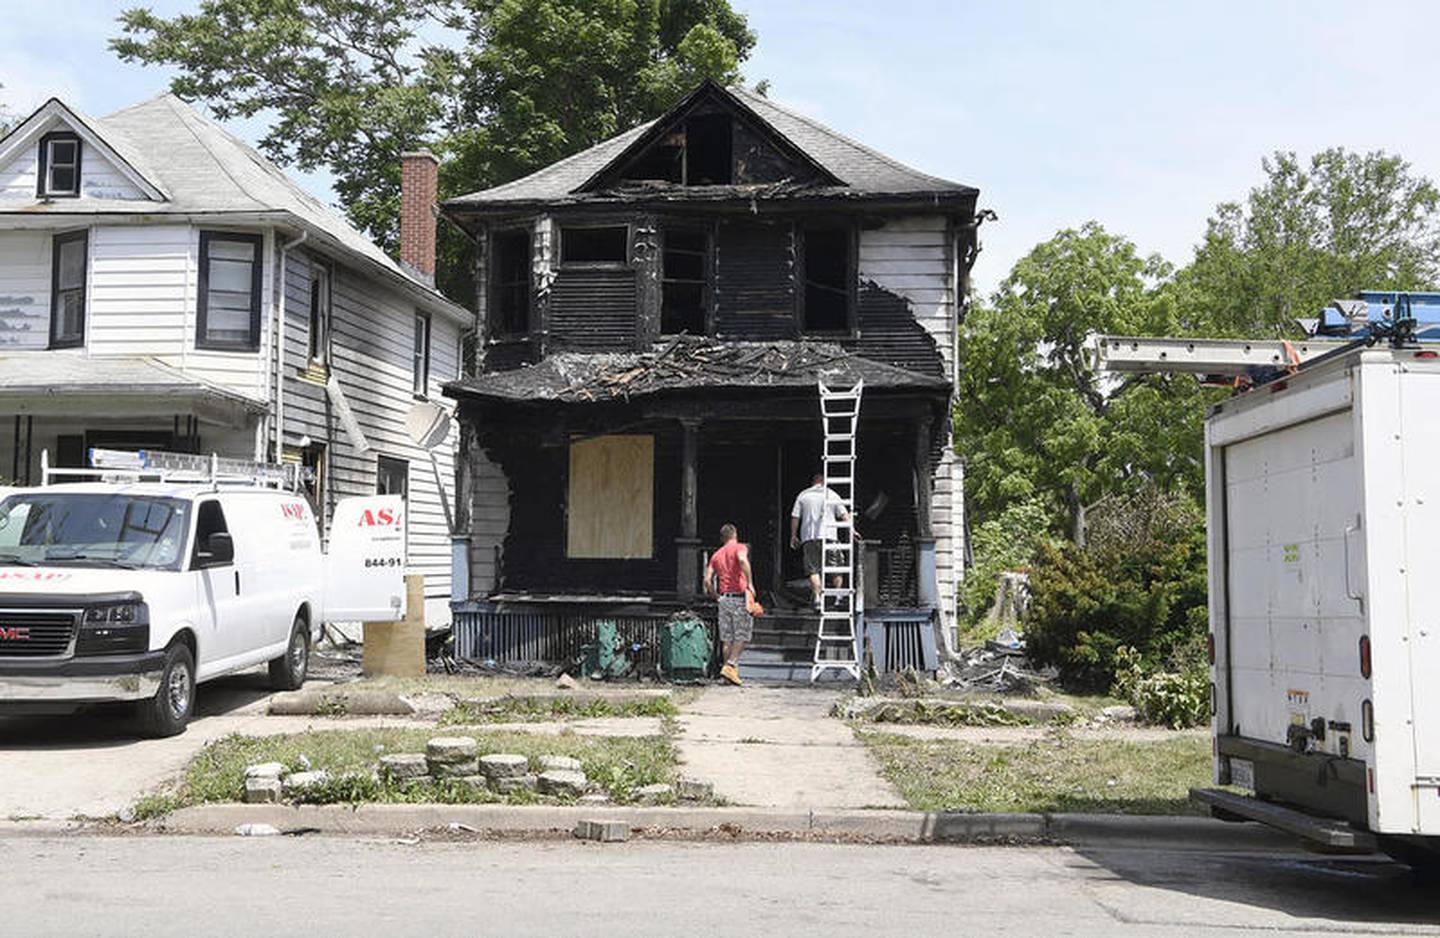 A home at 16 N. Center St. in Joliet that was destroyed in a fire allegedly caused by a flare gun on June 3, 2017. Two women and an infant died in the fire.